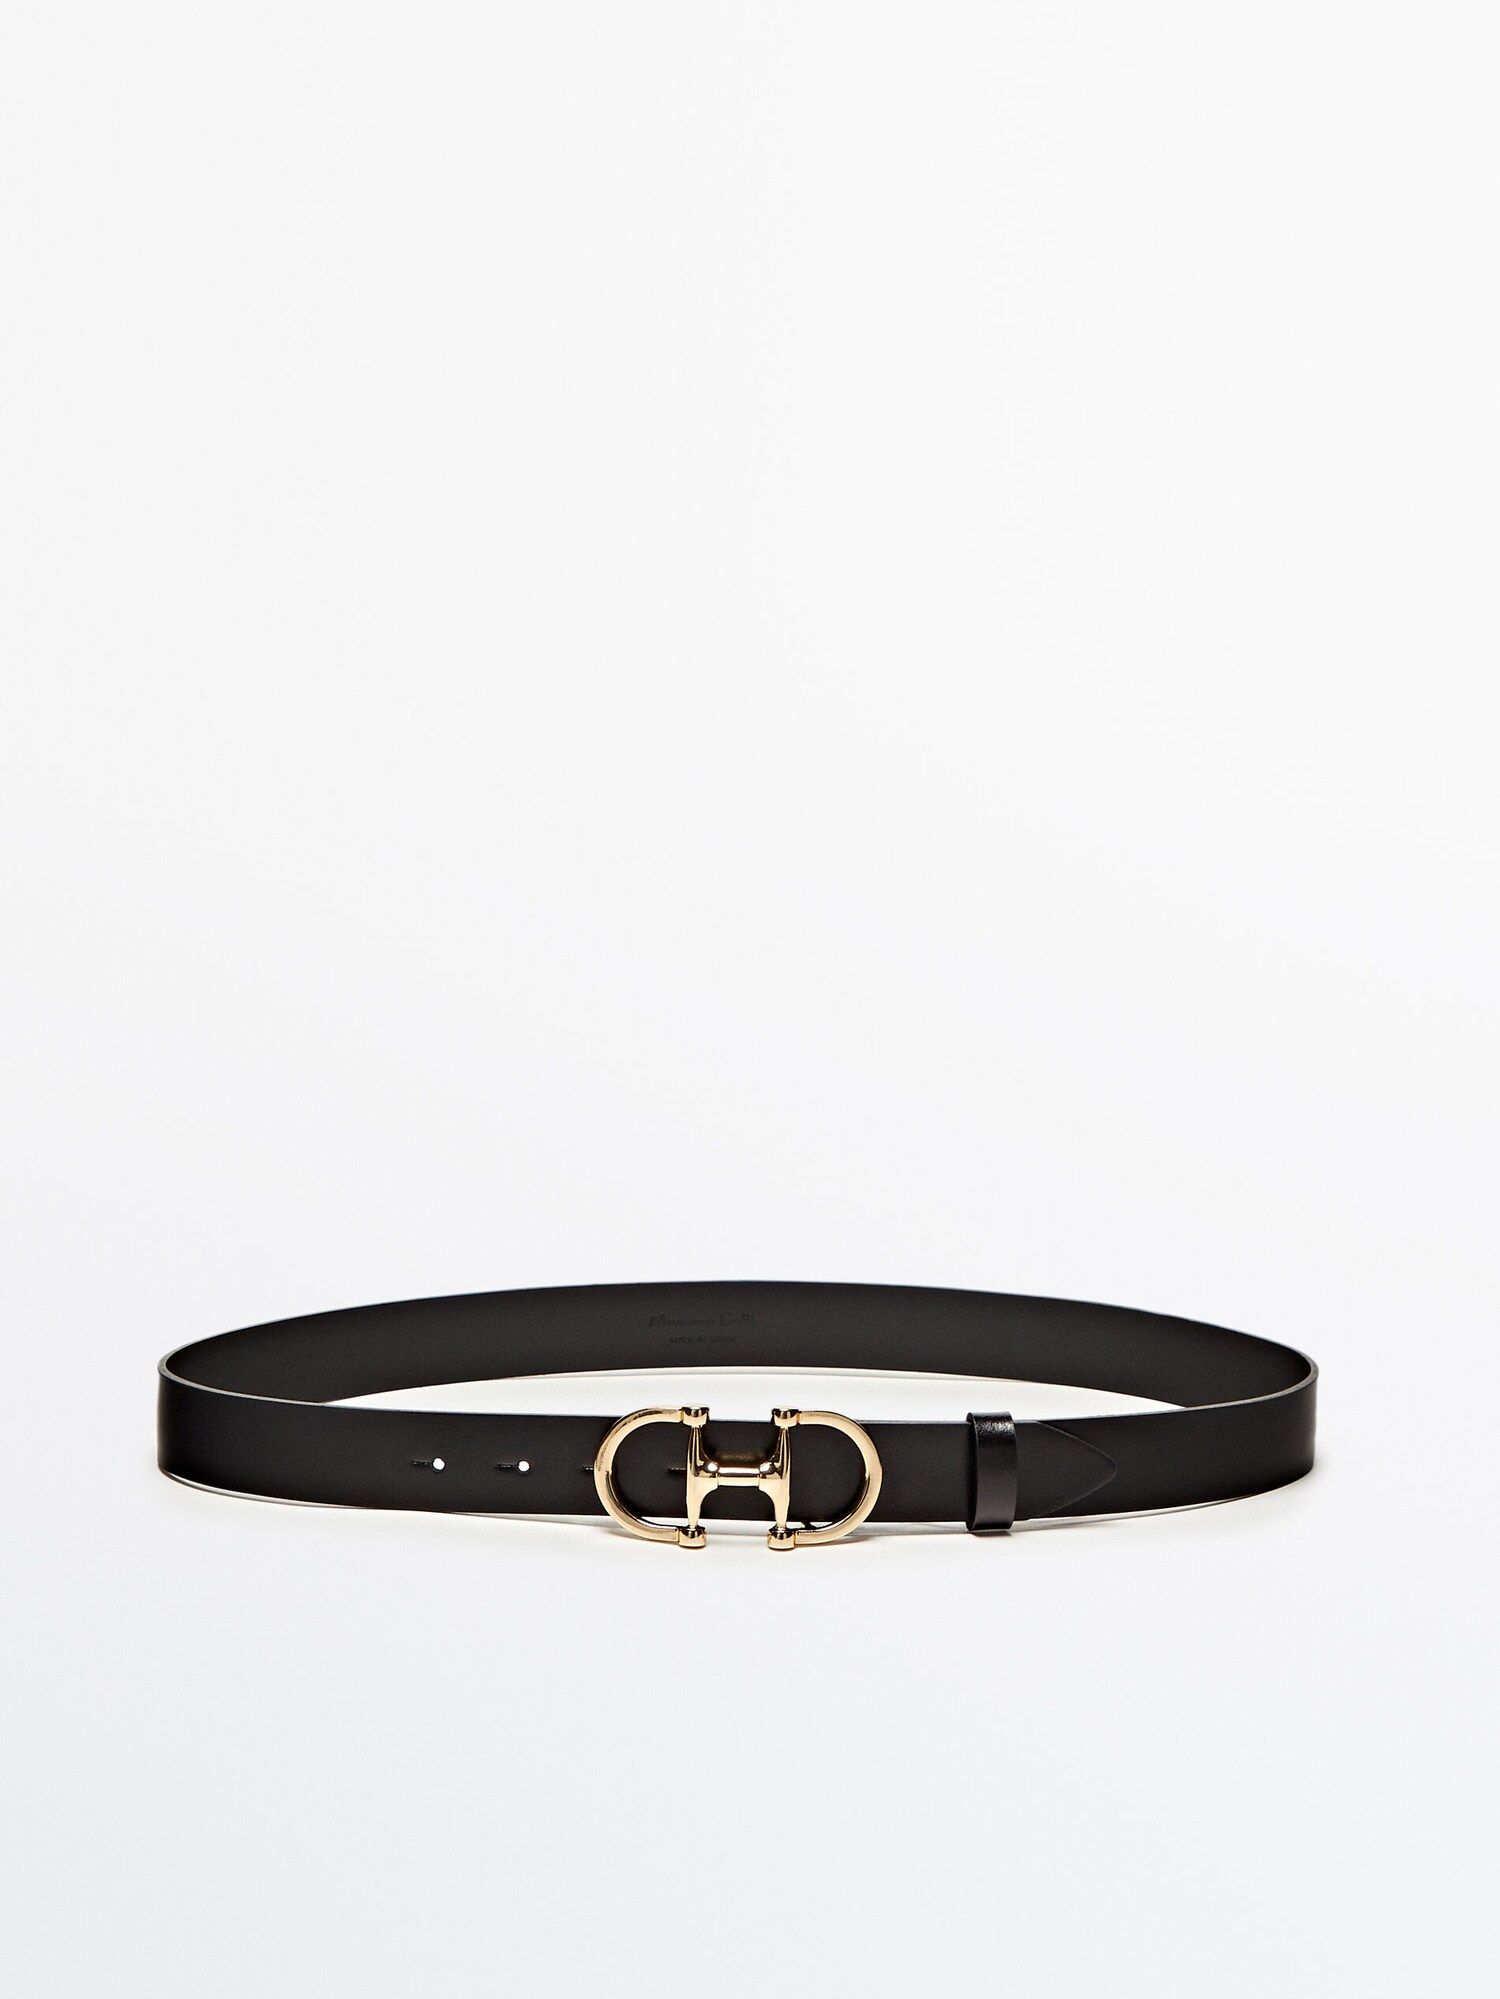 Leather belt with double buckle | Massimo Dutti (US)